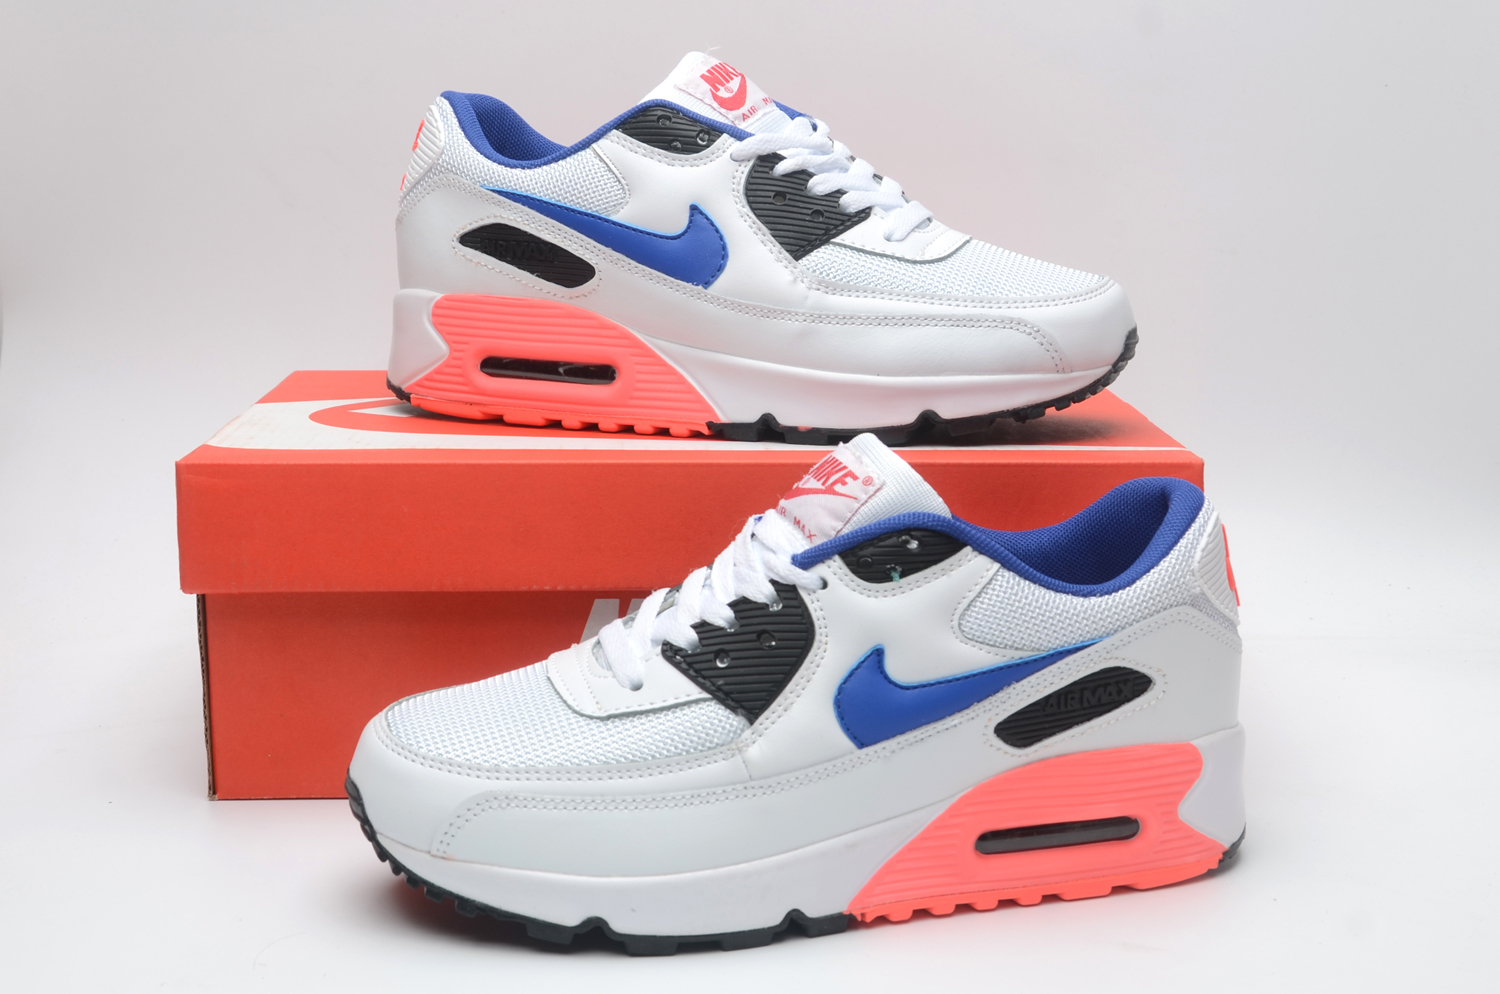 Men's Running weapon Air Max 90 Shoes 046